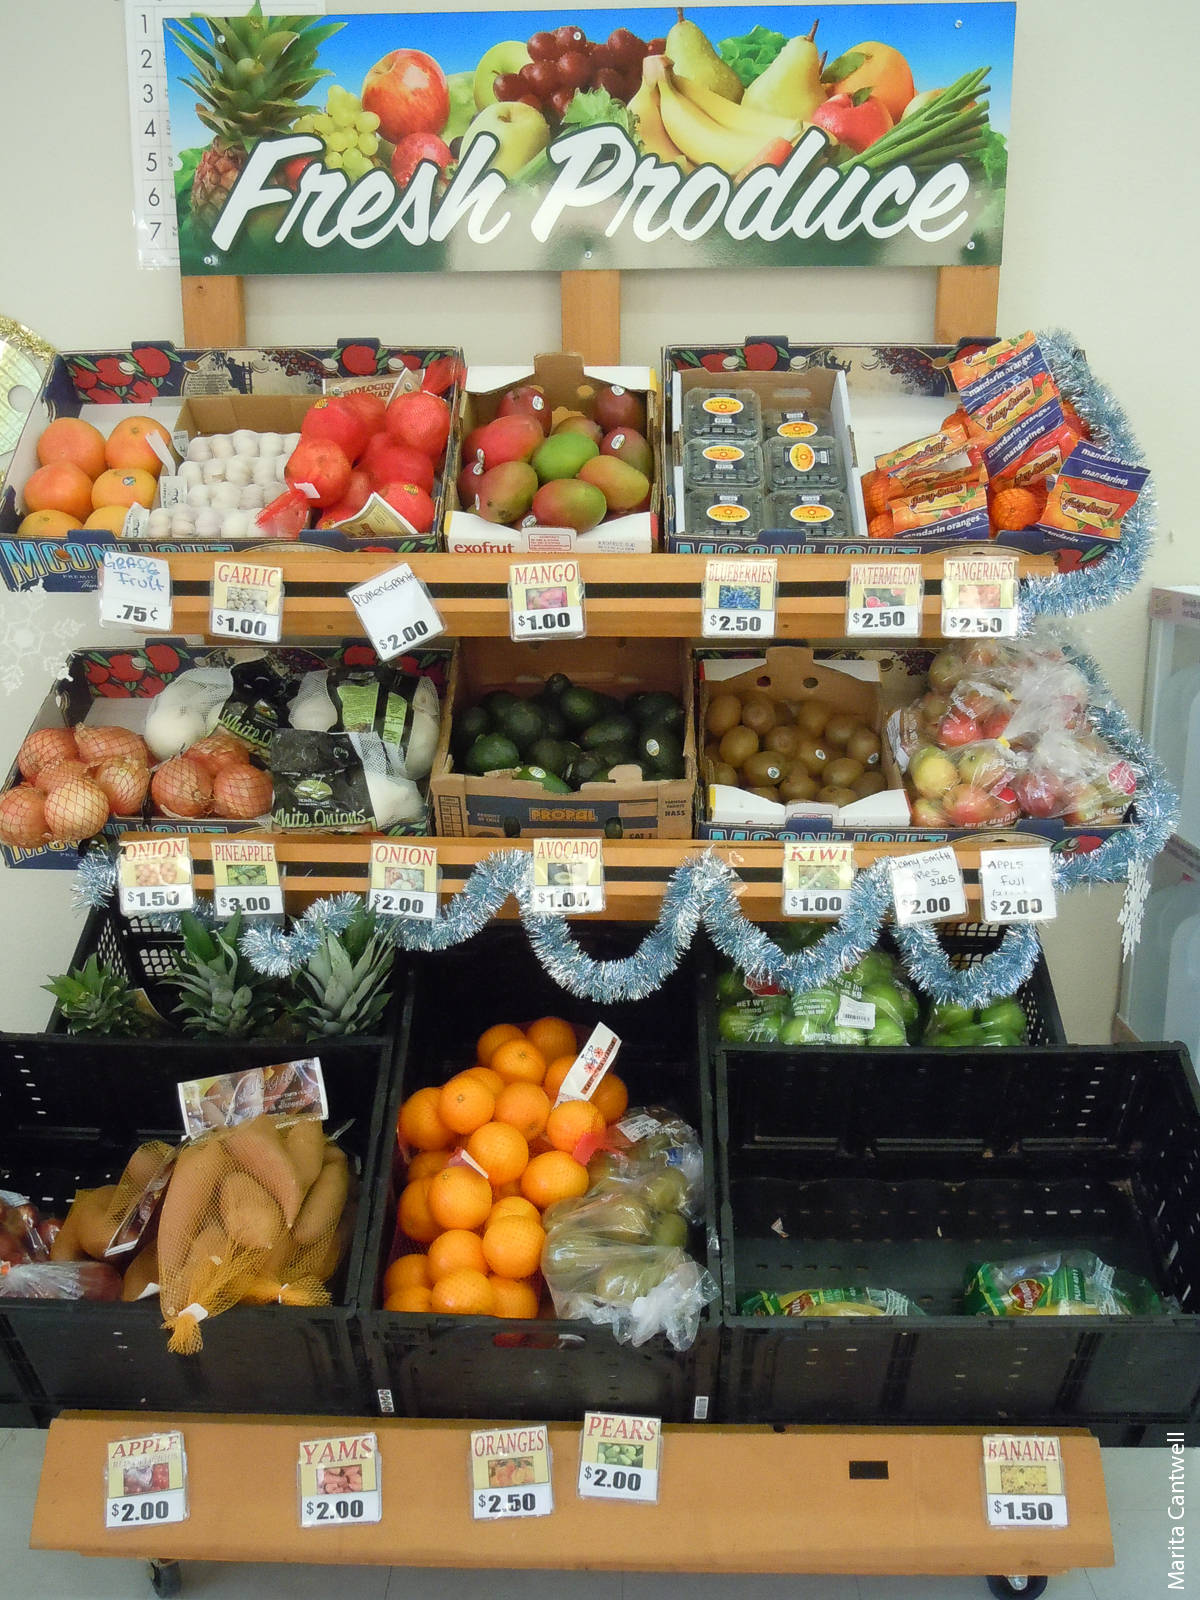 As a result of the new policy on WIC produce vouchers, many A-50 vendors in California began to carry a wider variety of fruits and vegetables.